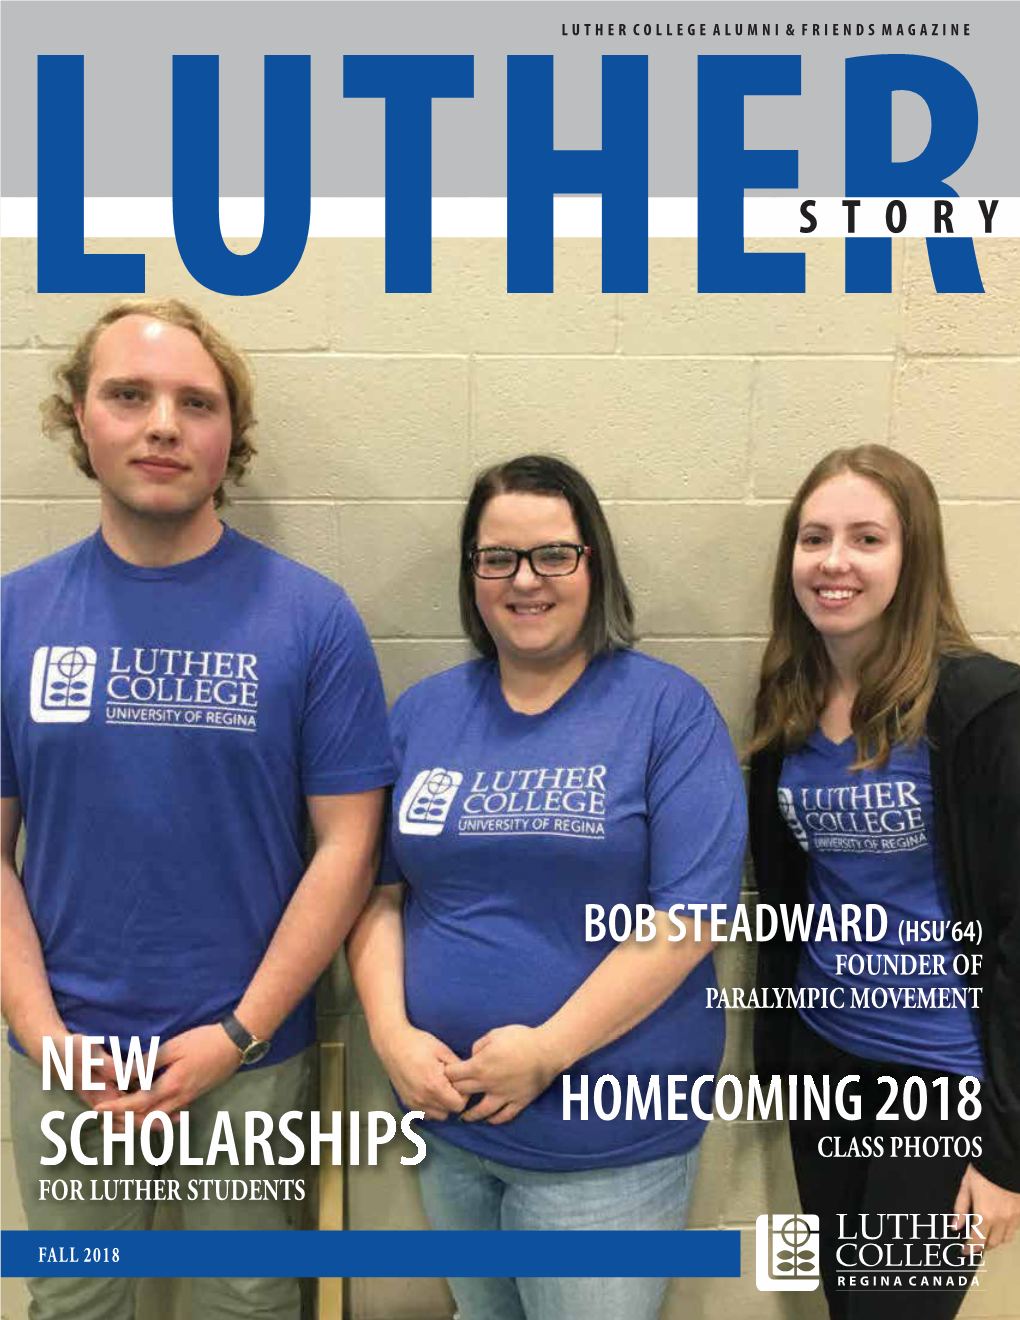 116685 LUTHER STORY FALL2018 Web